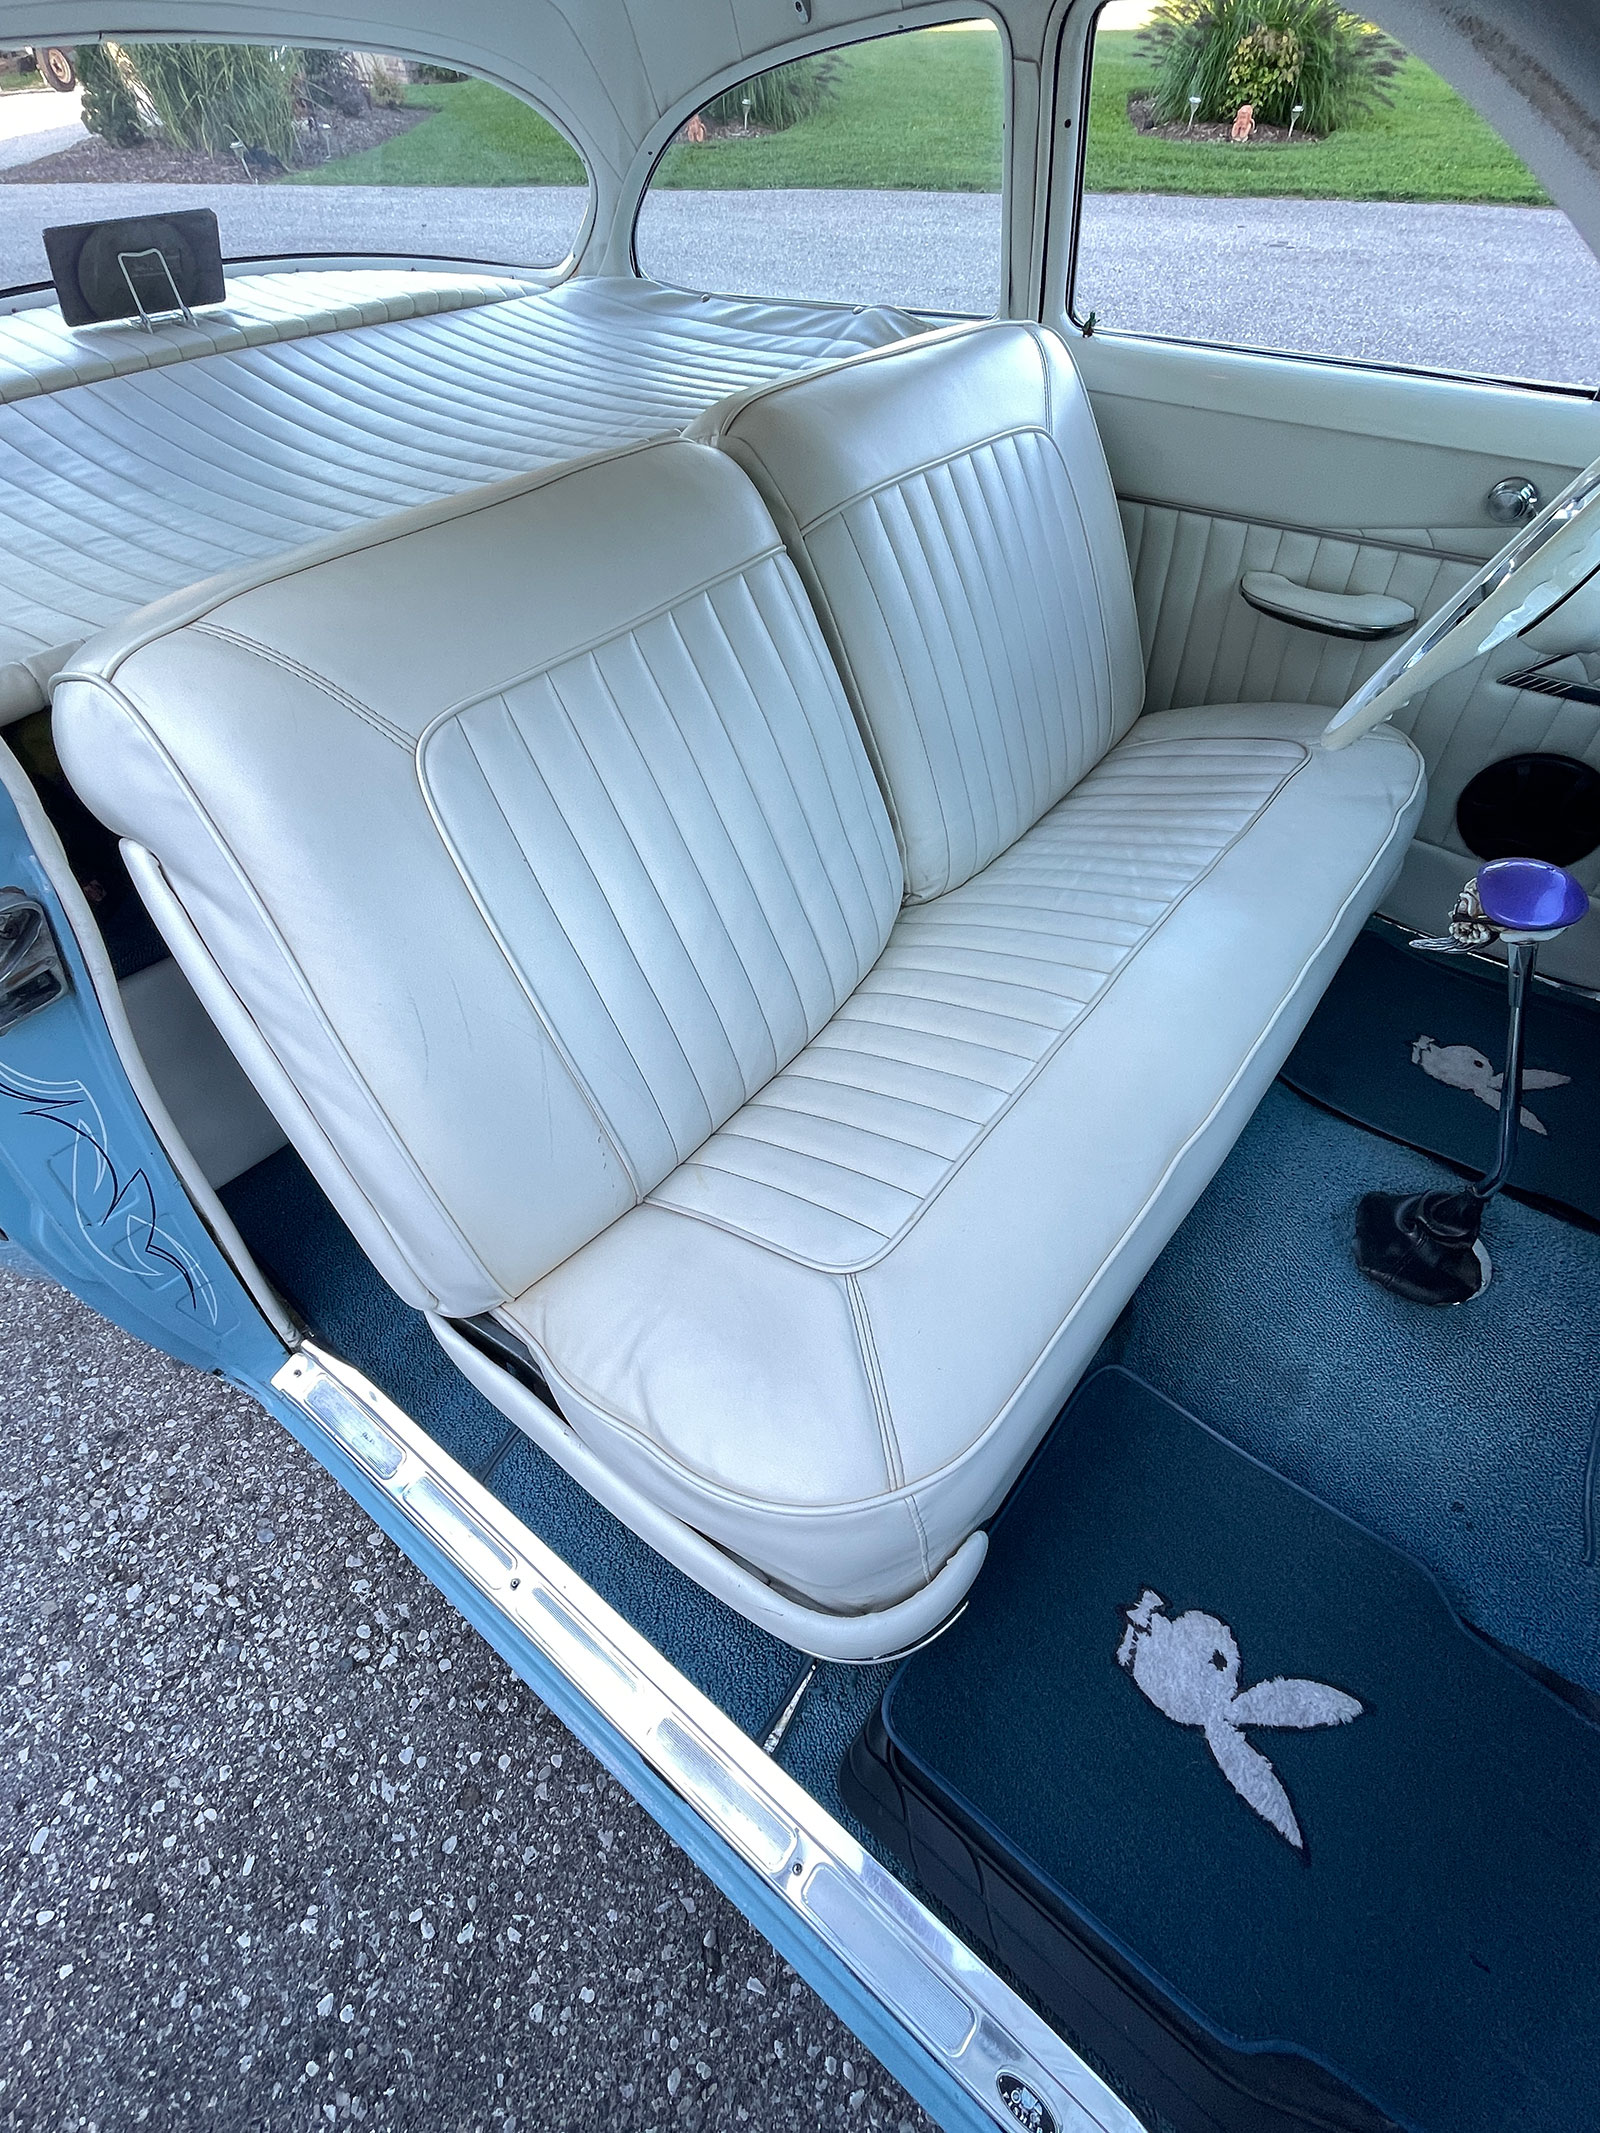 13 The Chevy 210 s white vinyl rolls and pleats crafted by Gold Star Upholstery